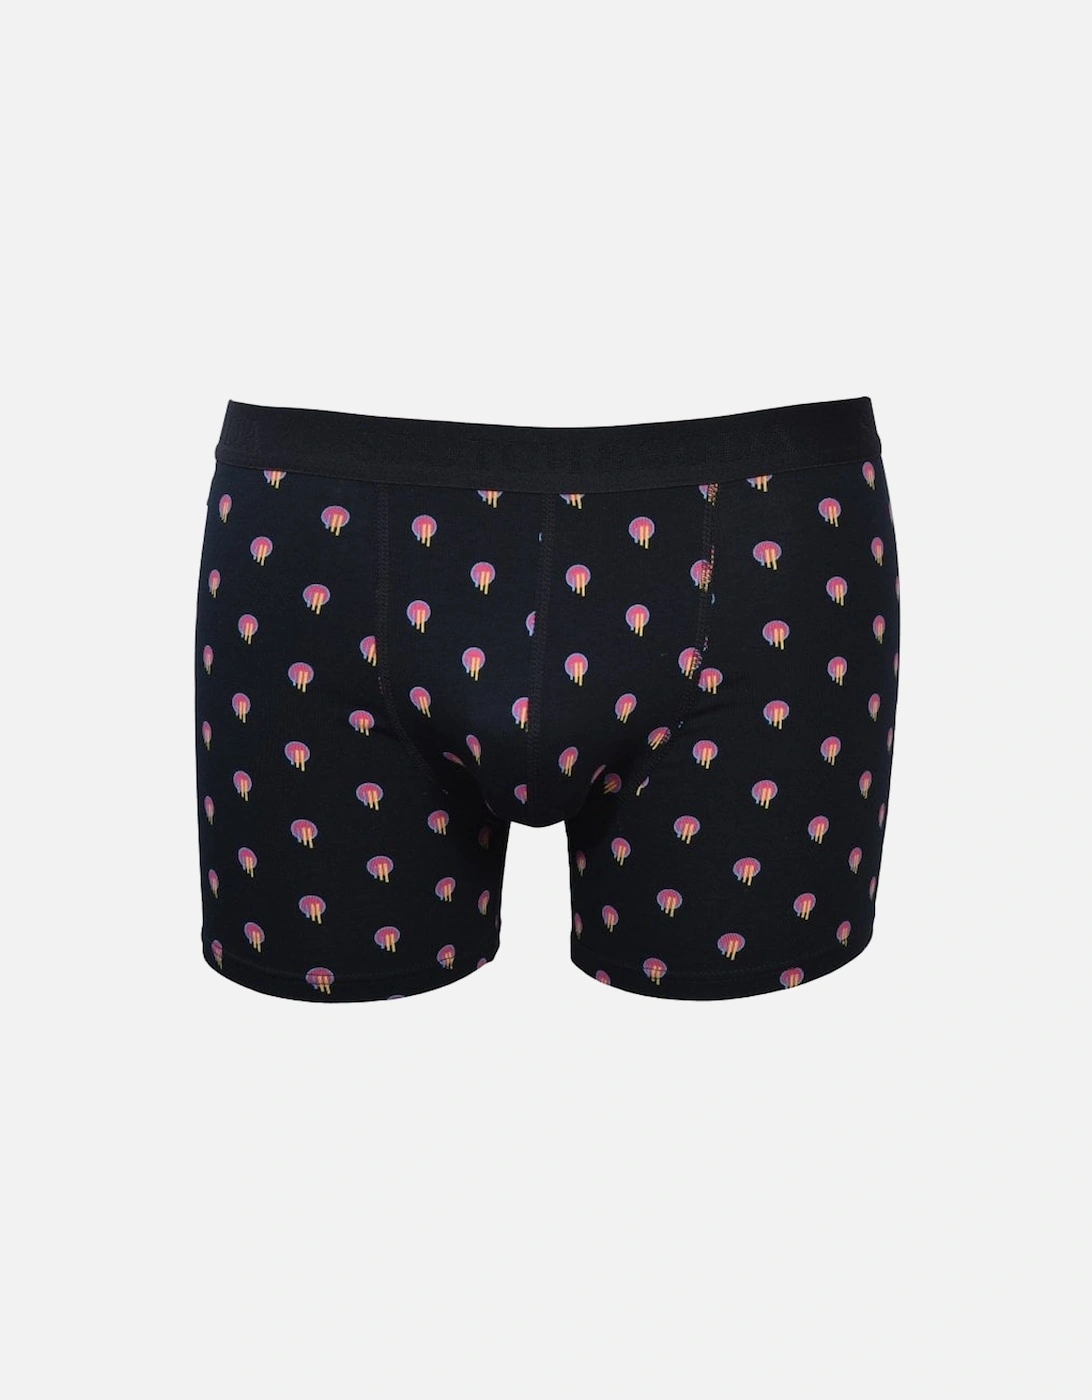 2-Pack Dot and Ditsy Print Boxer Briefs, Black